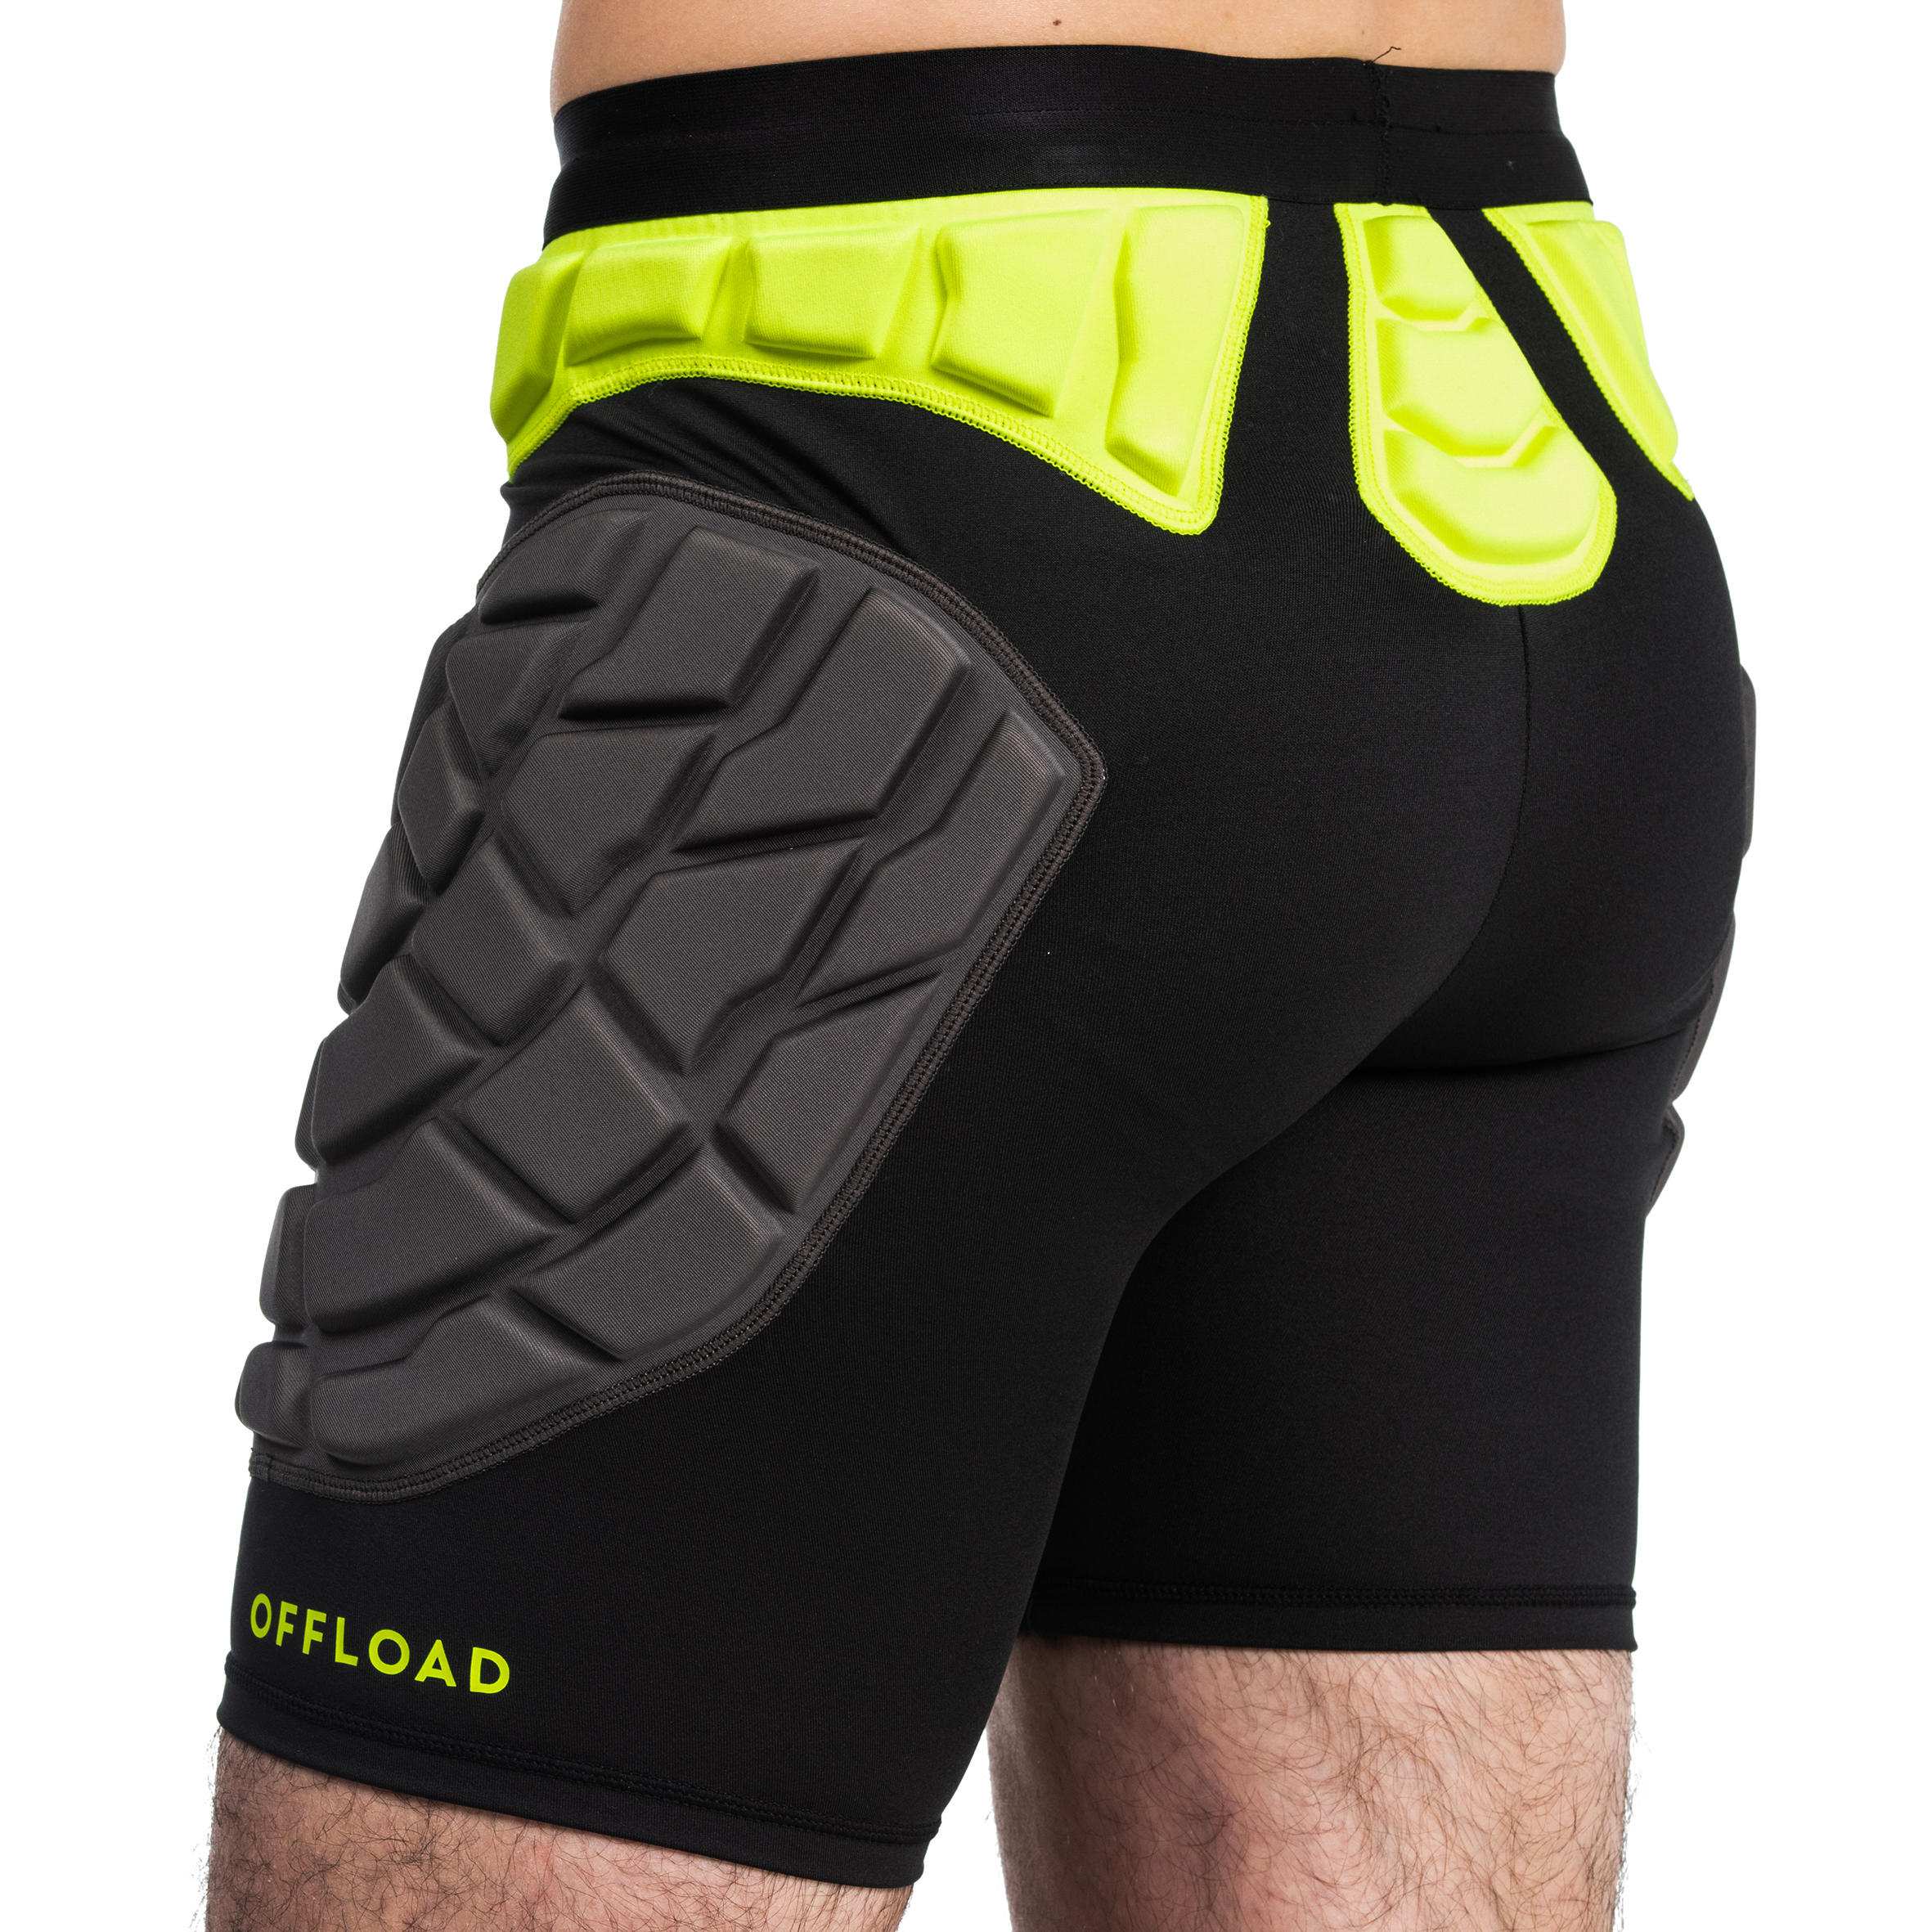 Men's Protective Rugby Undershorts R500 - Black/Yellow 2/9